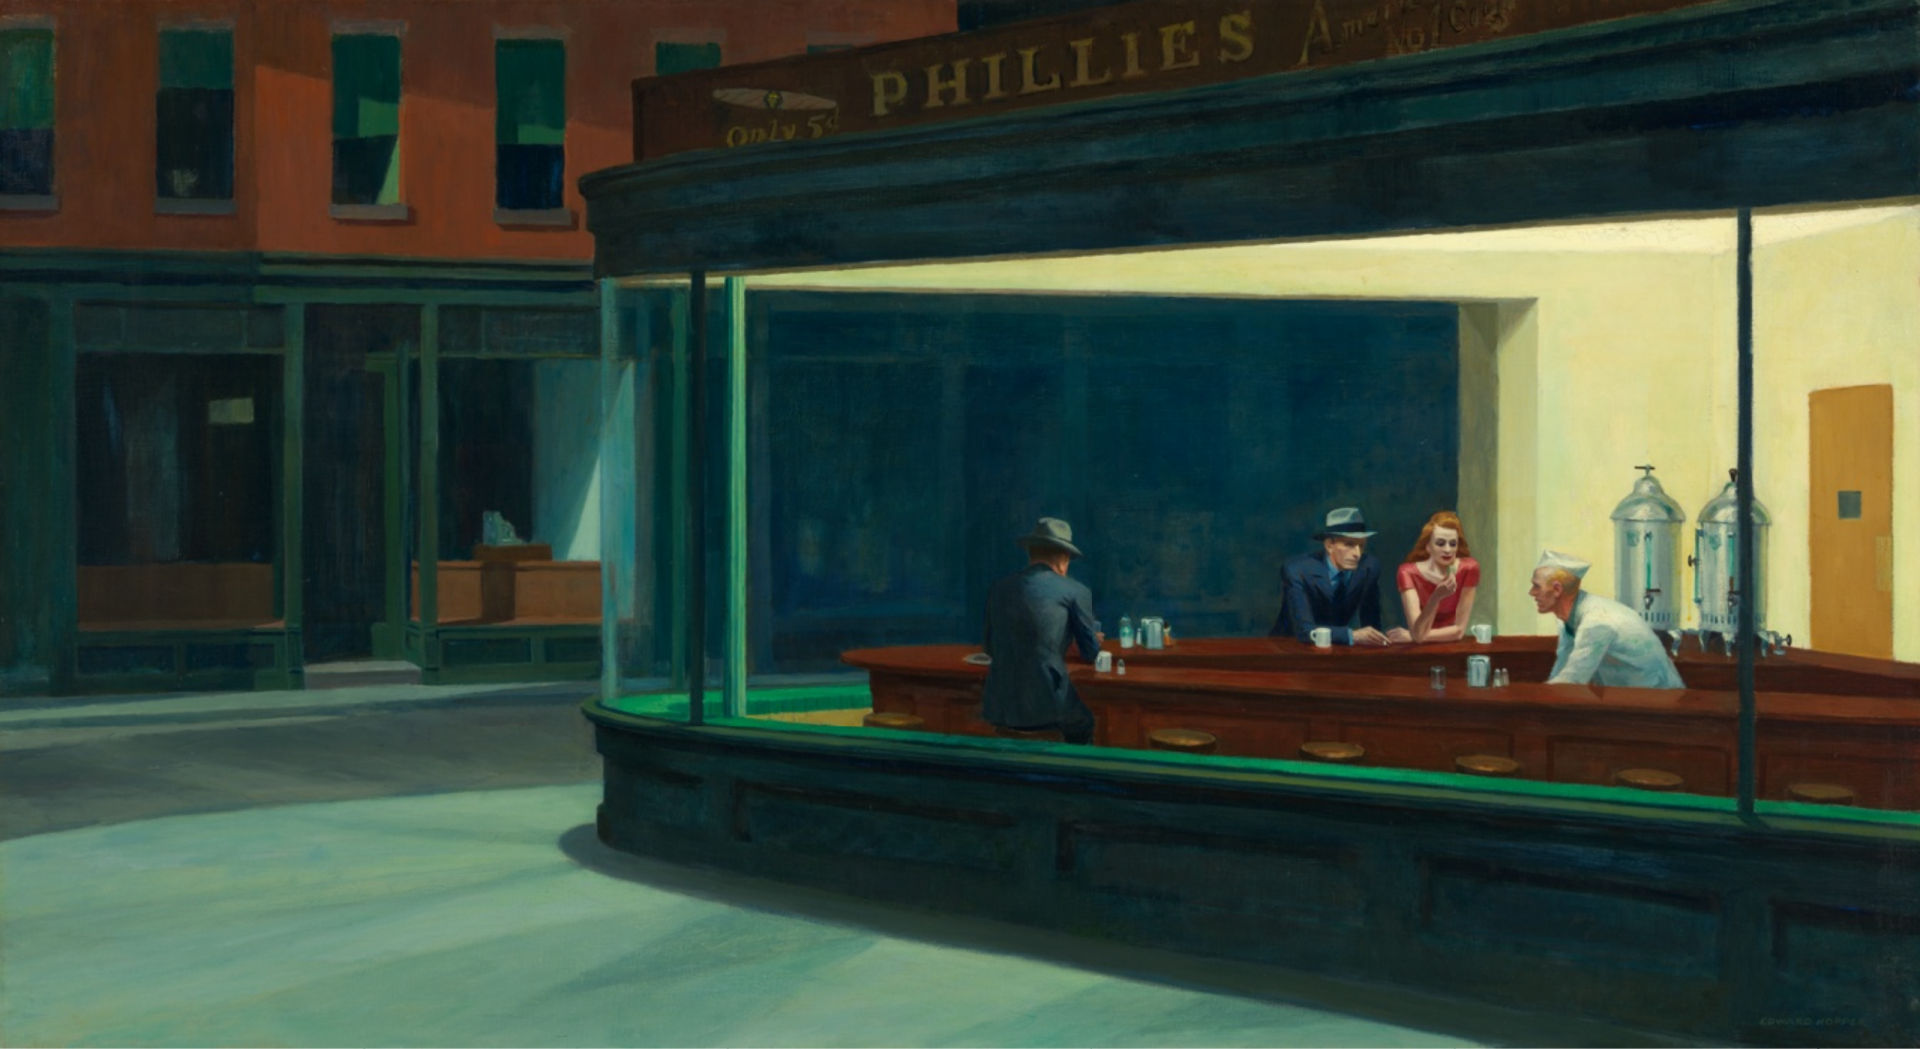 The 1942 painting 'Nighthawks' by Edward Hopper, featuring a bright, illuminated diner on a dark, empty city corner at night. Three customers — two men in suits and a woman in a red dress — sit on stools at the counter, lost in their own thoughts, opposite a male server in white apron. The scene is viewed through a large glass window which encompasses the curved corner facade of the diner. There's no visible door. Outside, the quiet city street is barren and devoid of both people and clutter. The painting radiates an air of loneliness and isolation despite the warmth of the light from the diner.